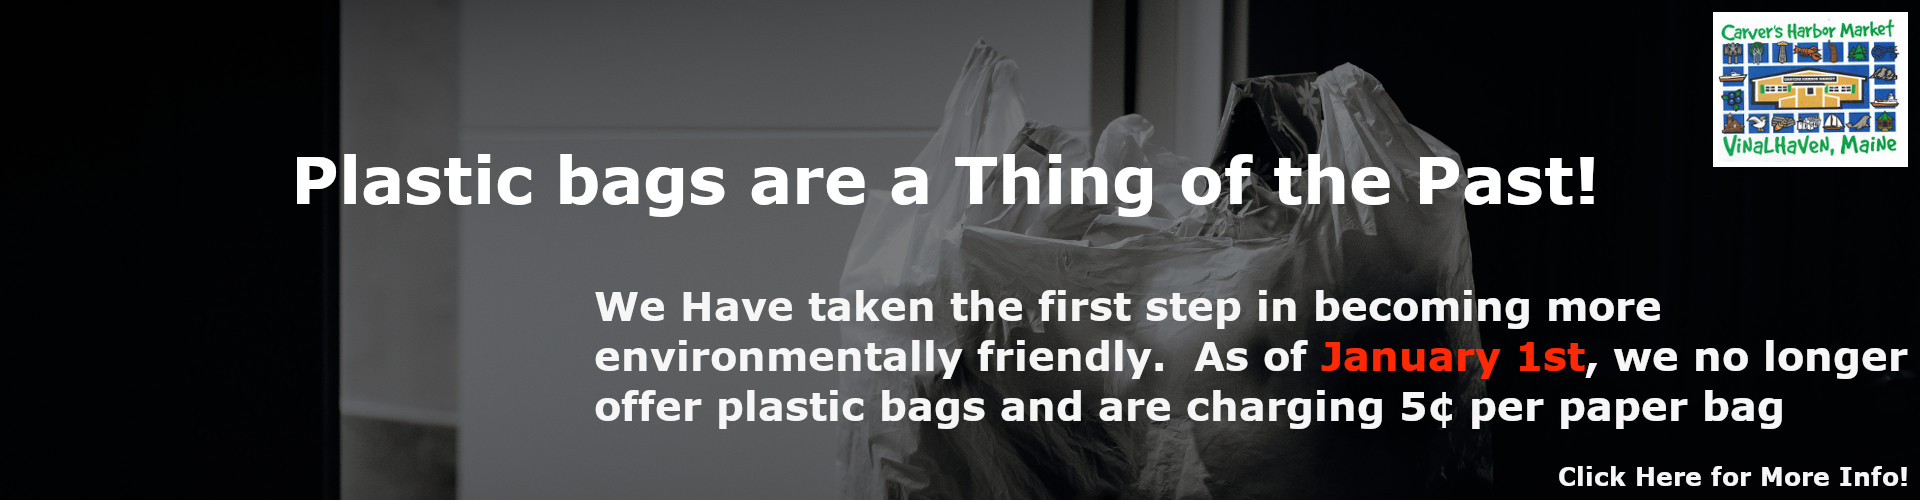 Plastic bags are a thing of the past!